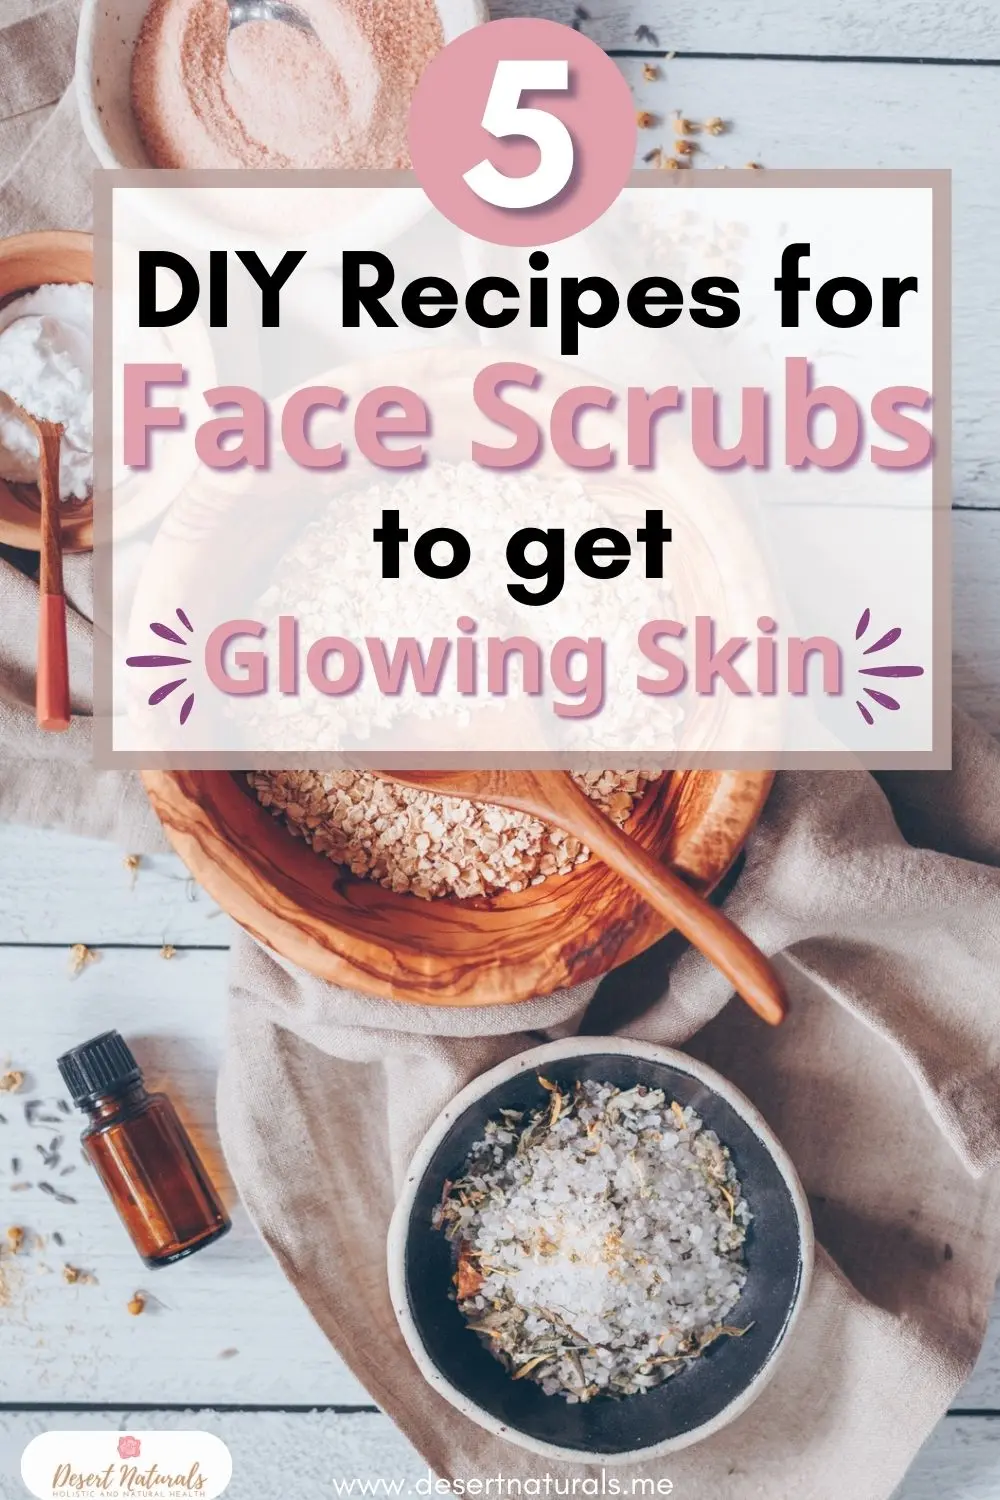 5 DY recipes for face scrubs to get glowing skin